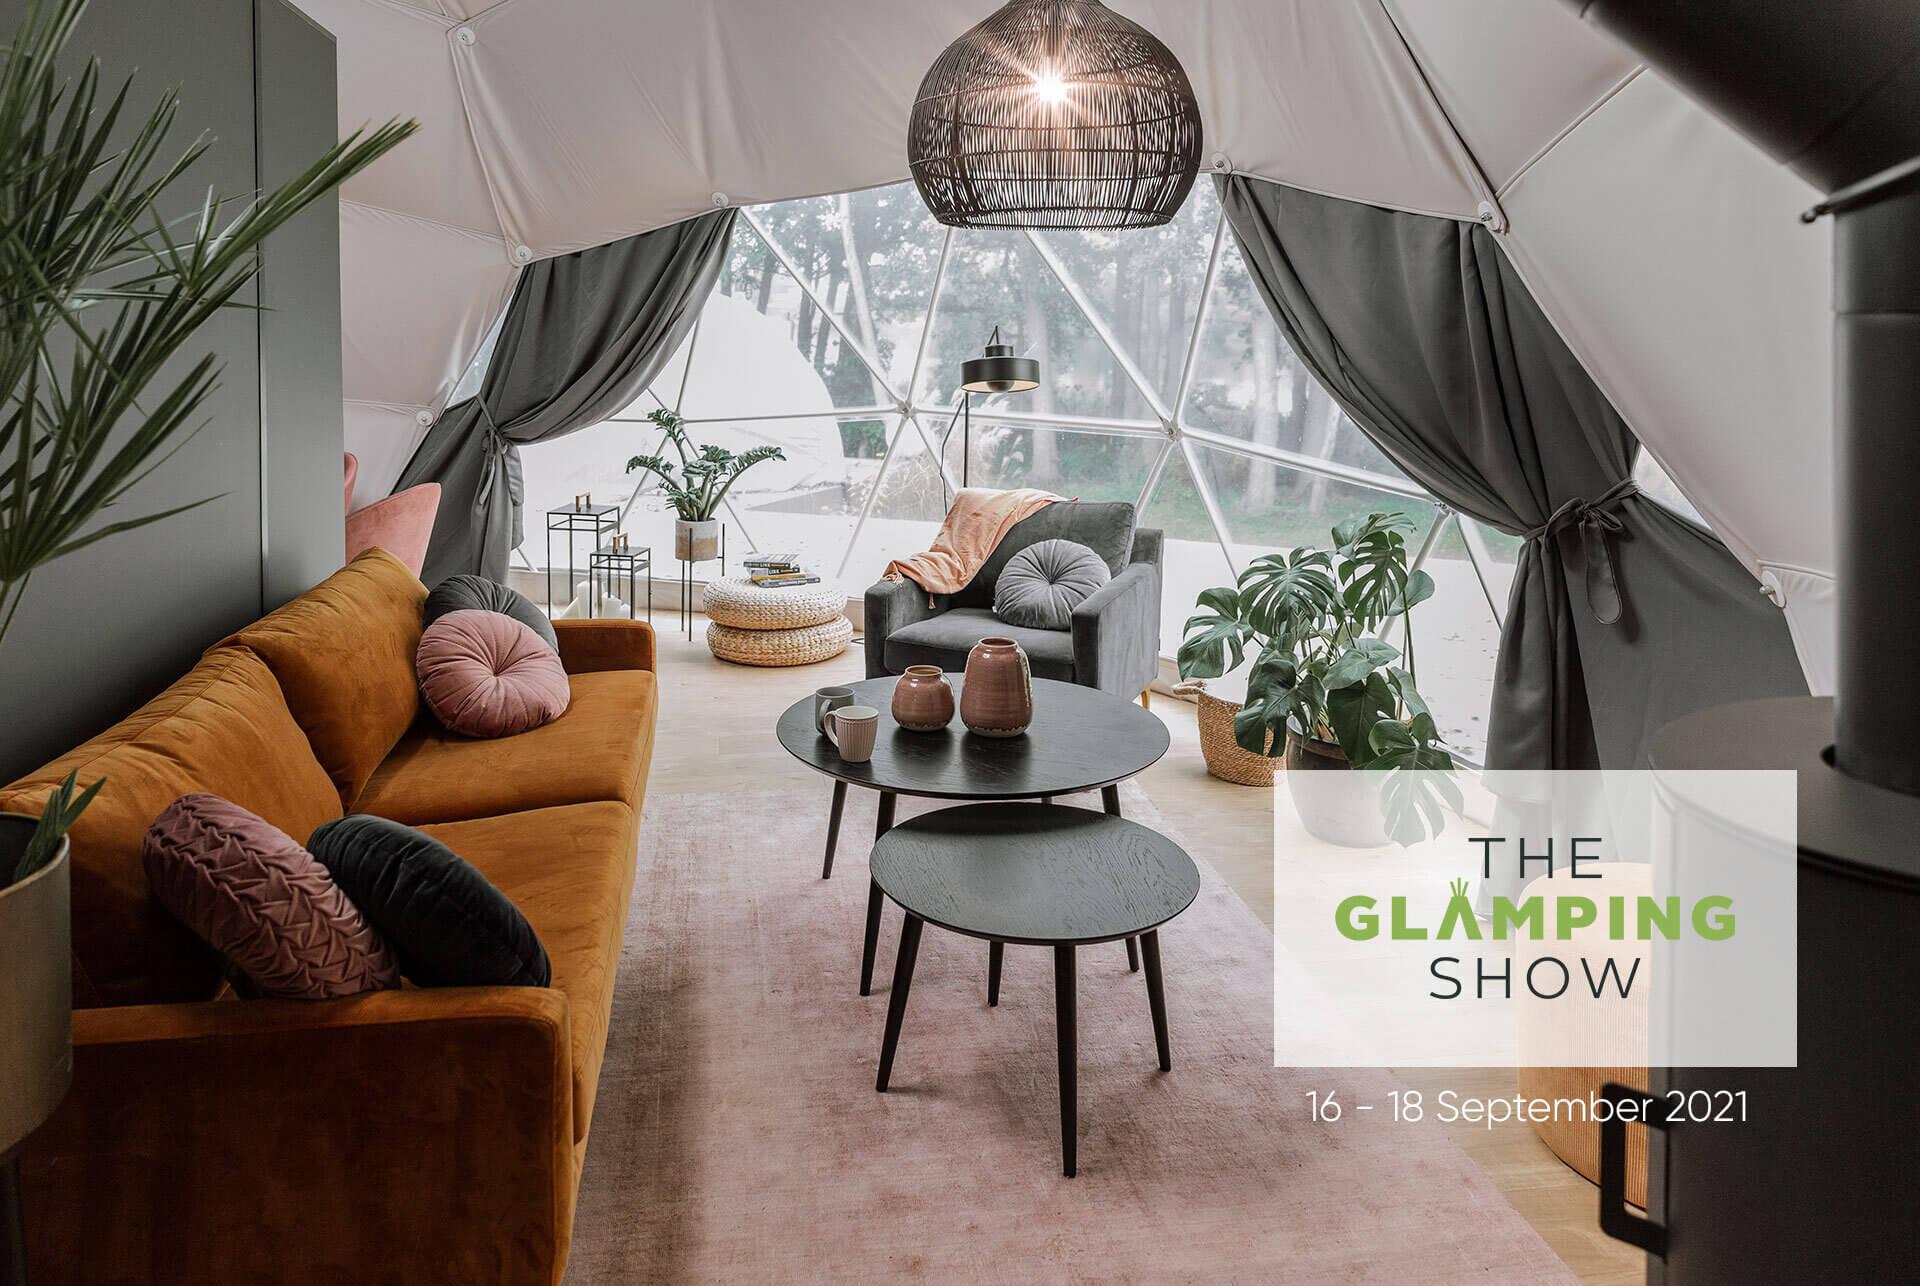 inside at geodesic dome with view on living room with text "the Glamping show 16 - 18 September 2021"